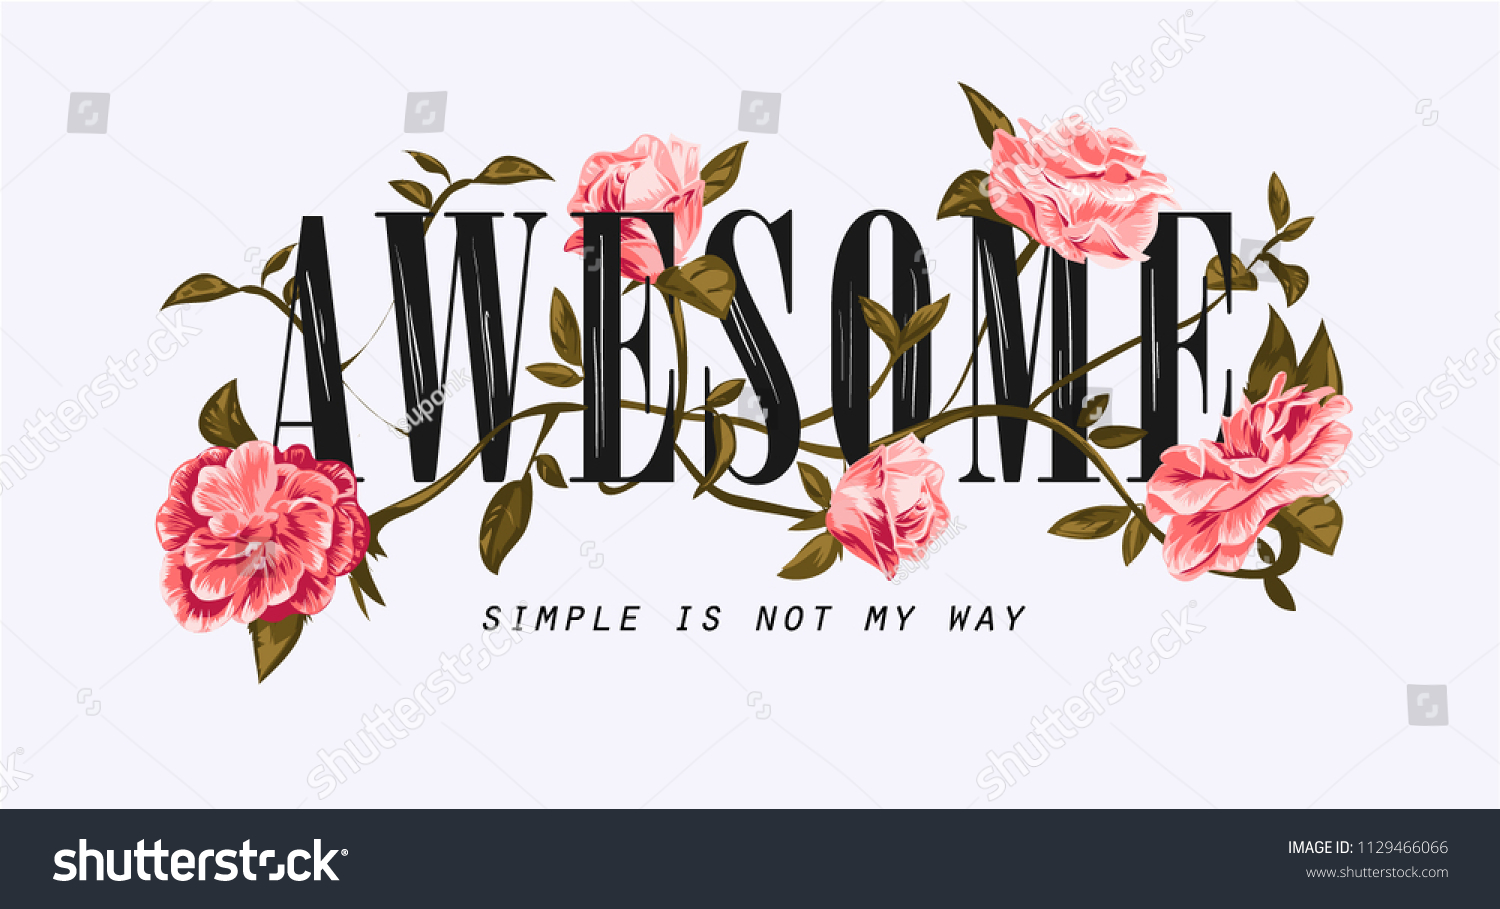 awesome slogan with flower illustration #1129466066